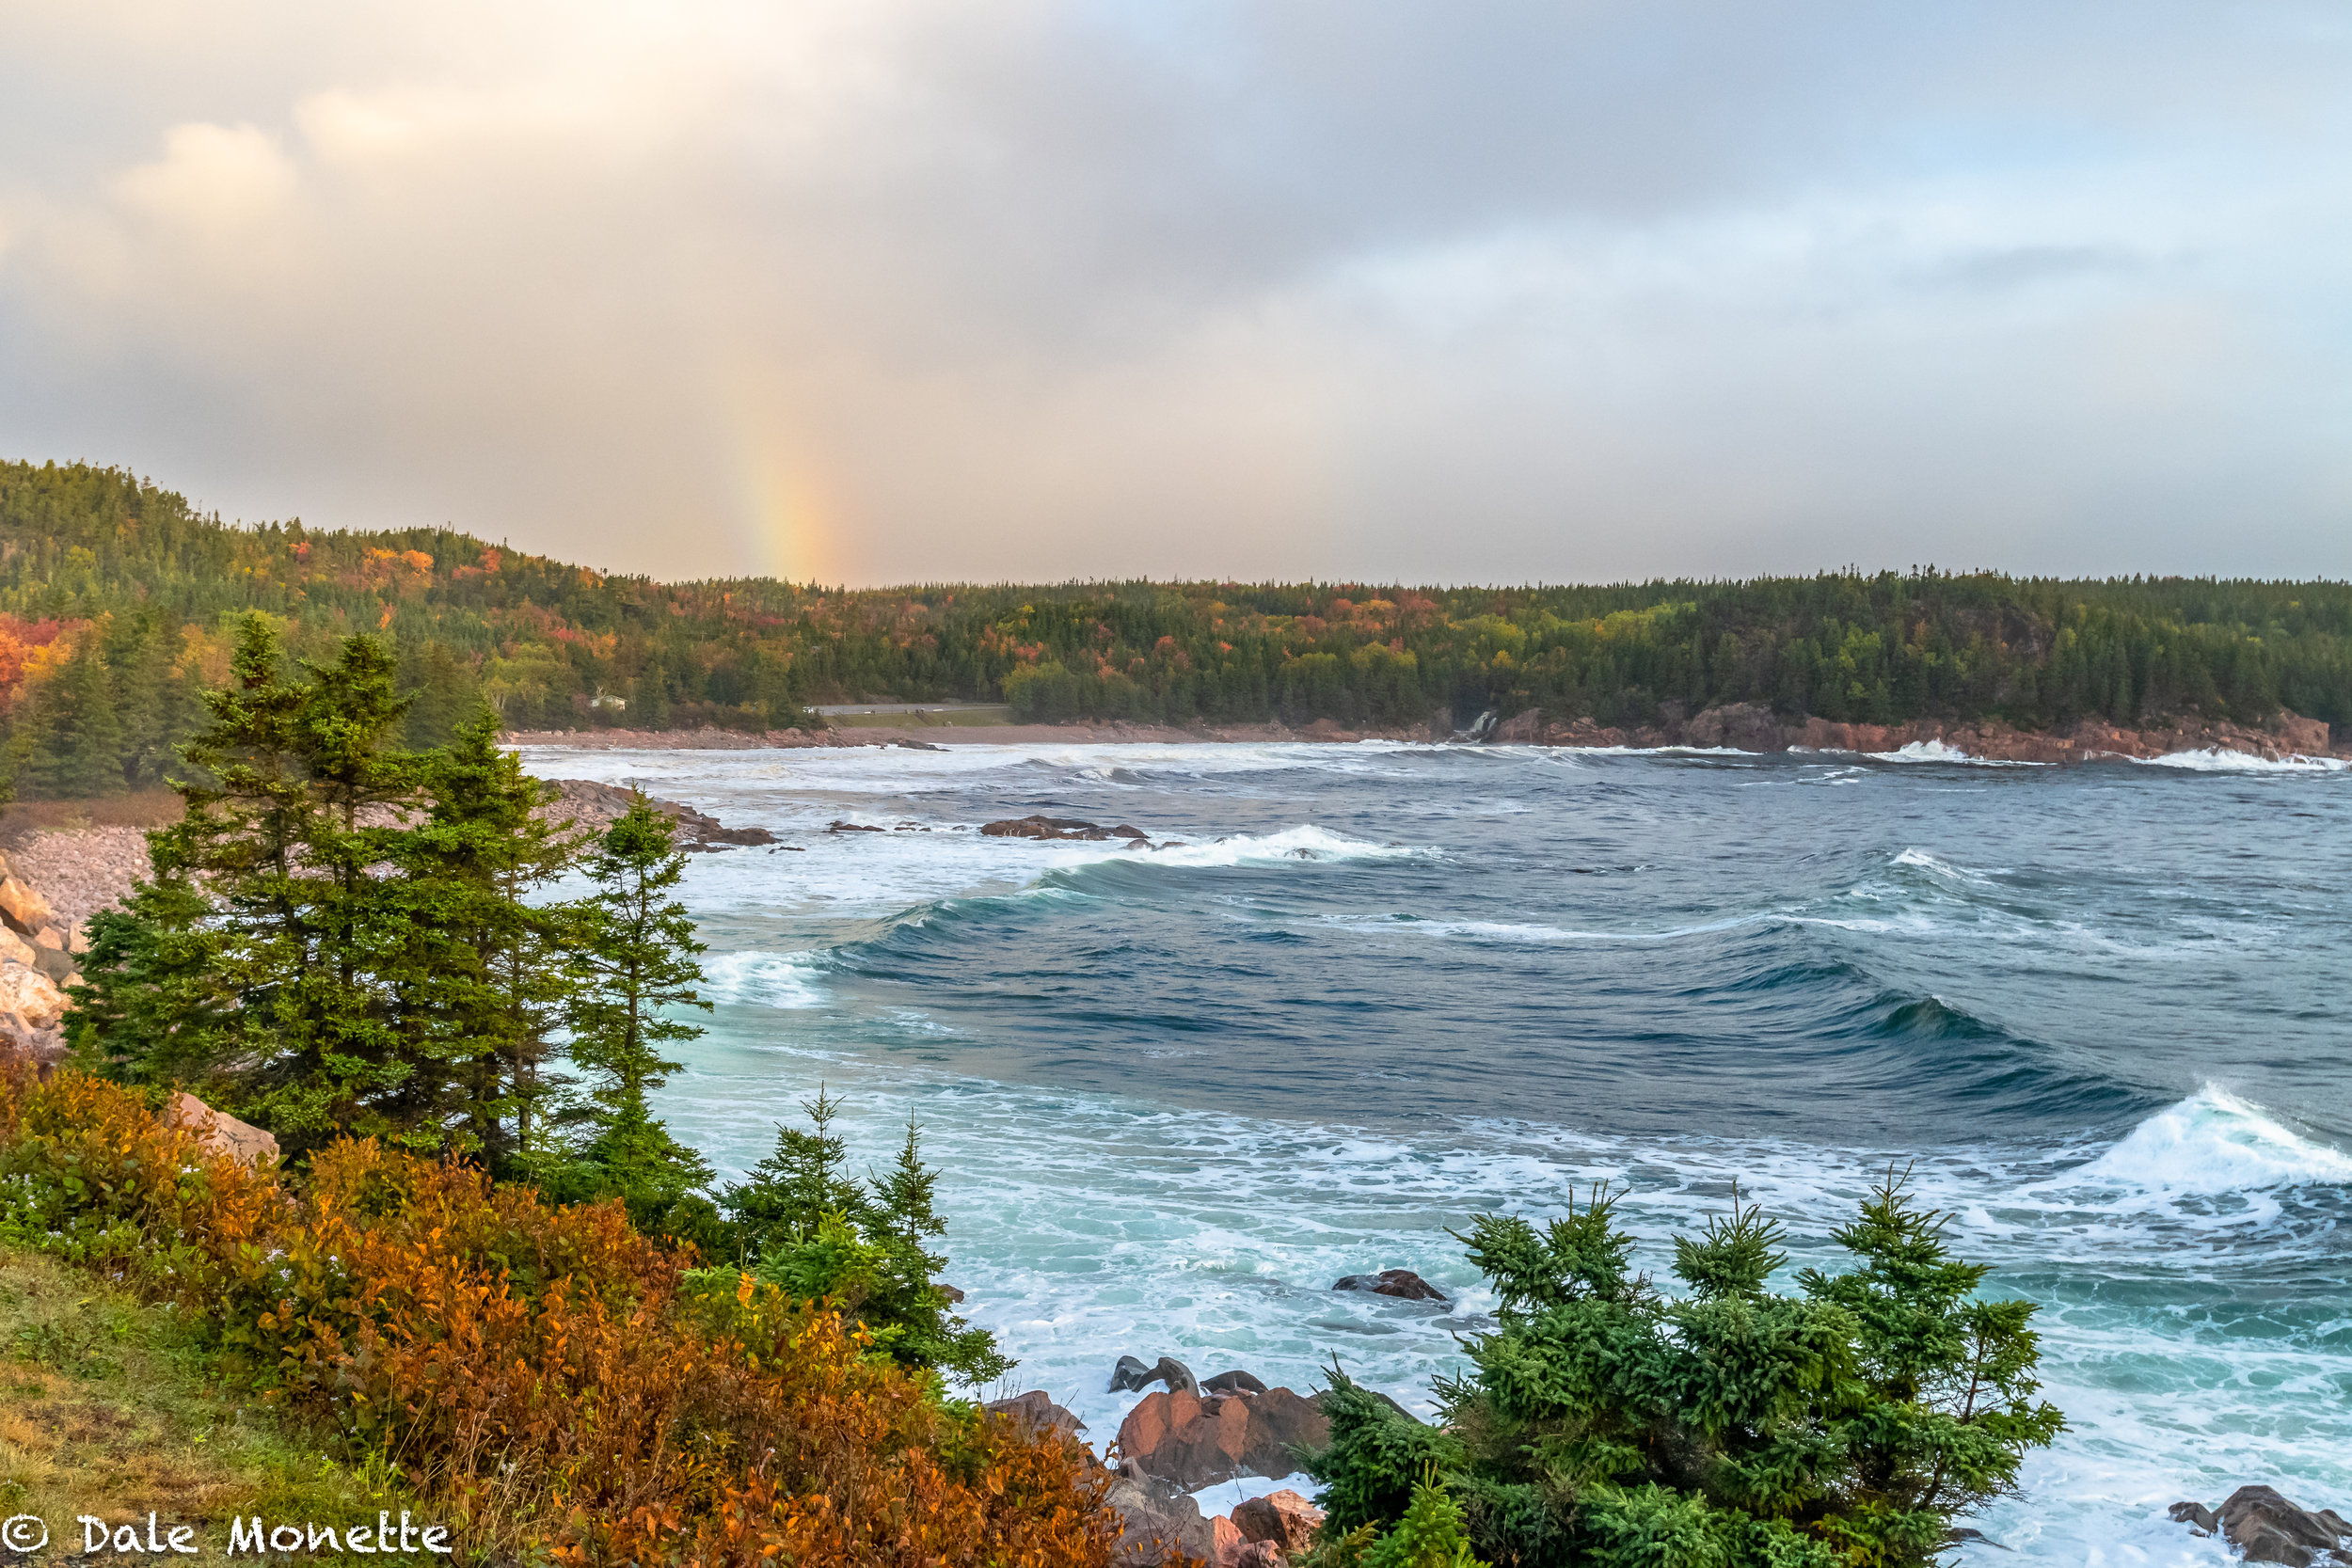   Black Brook Cove on the Cabot Trail, Cape Breton, Nova Scotia. Because of the weather systems up there, Cape Breton has the most rainbows a year in the world !    